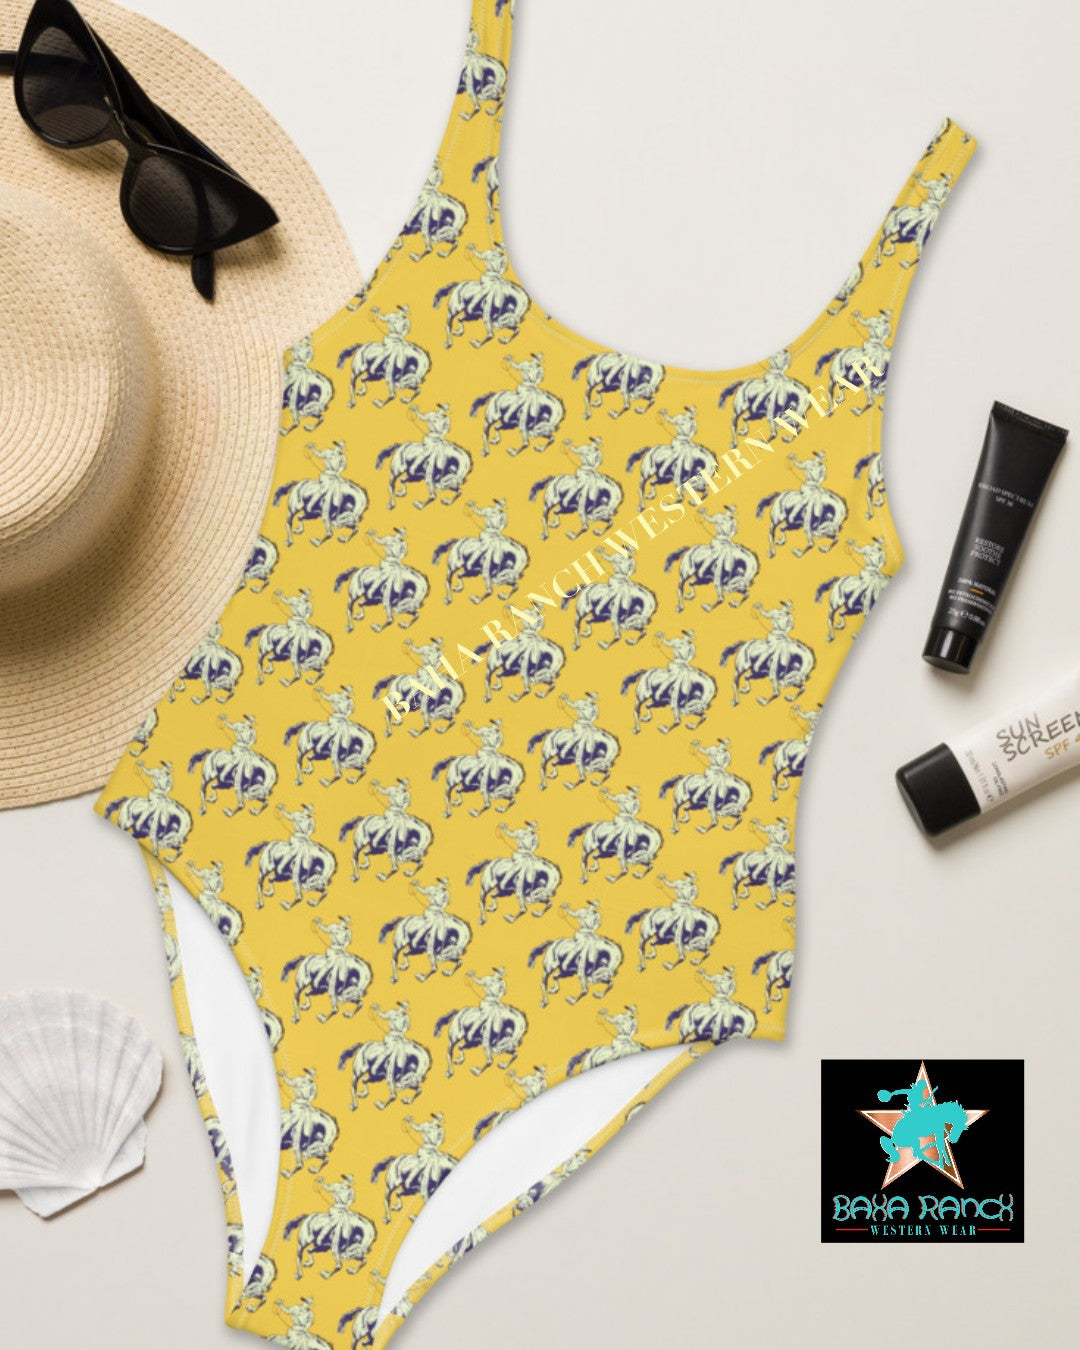 Yeehaw Vintage Bronc Buster One-Piece Swimsuit - #beach, #one-piece, #onepiece, #op, #swim, #swimming, #swimsuit, beaches, bronc, bronc buster, pool, swimsui, vintage -  - Baha Ranch Western Wear